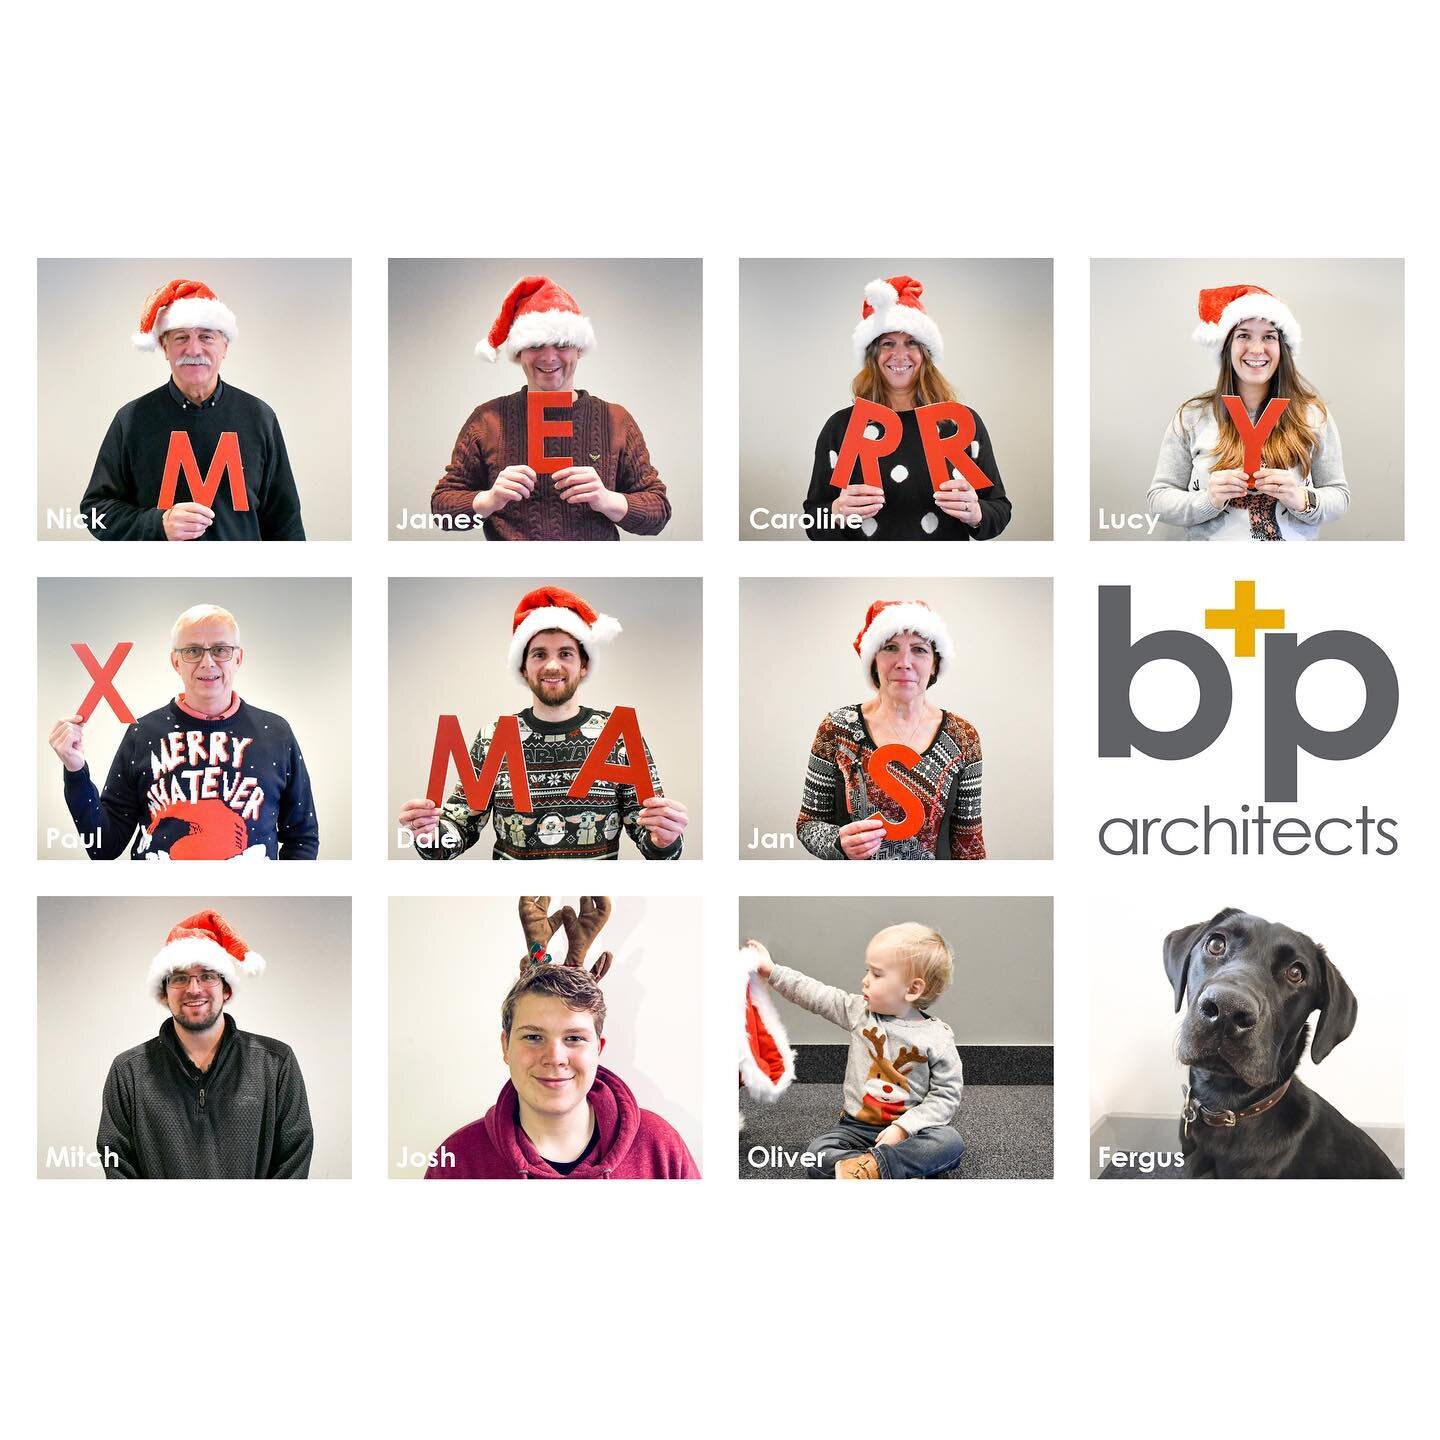 All of us at B+P would like to wish you a very Merry Christmas and a Happy New Year 🎄✨
.
Our office will be shut from December 23rd, reopening January 3rd.
.
#merrychristmas #seasonsgreetings2022 #officechristmascard #bparchitects #meettheteam #merr